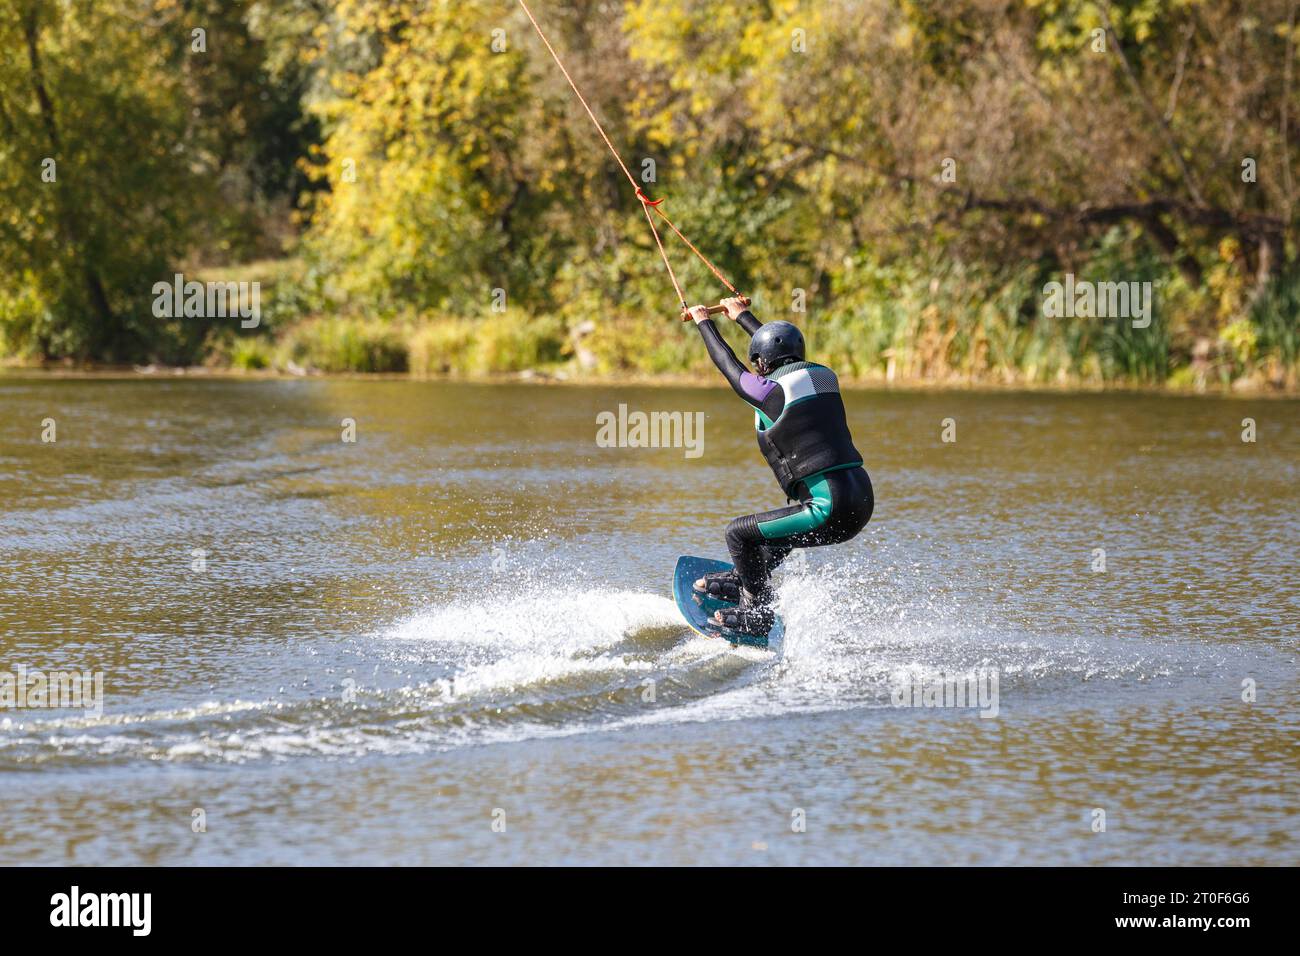 A woman surfing on wakeboard along the river. Stock Photo